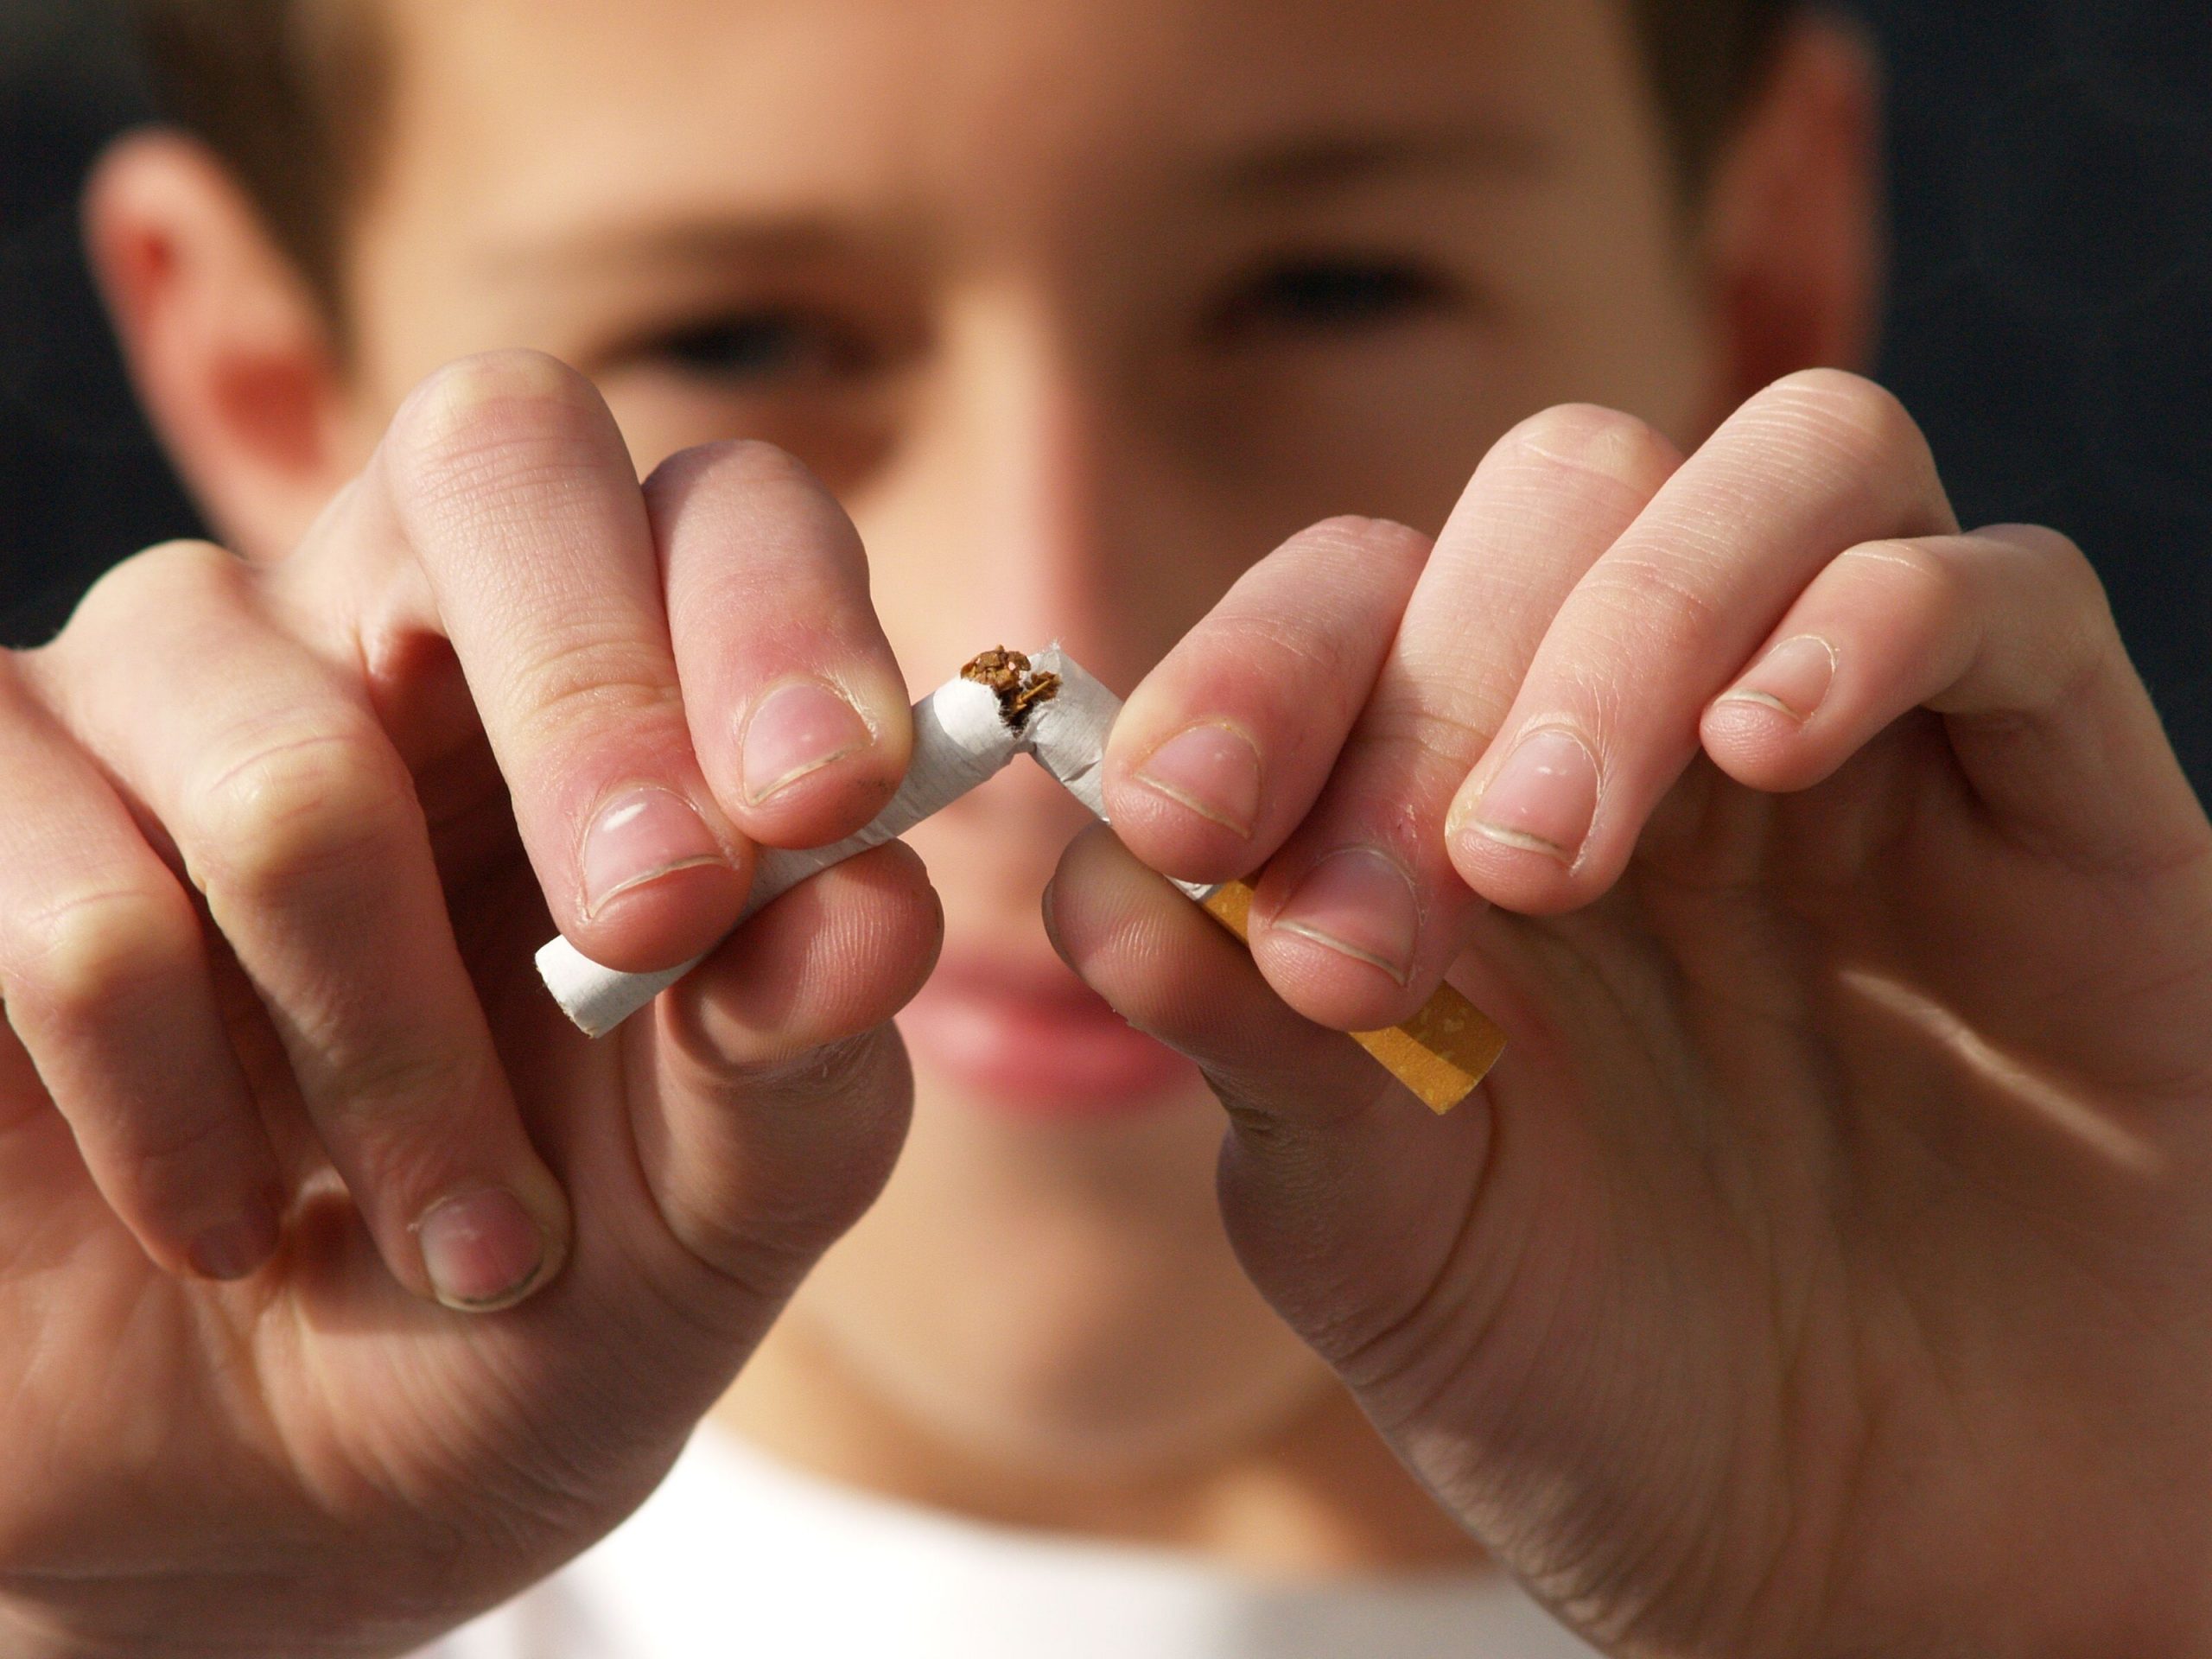 Bellingham WA Dentist | Tobacco & Your Teeth: The Risks of Chewing and Smoking